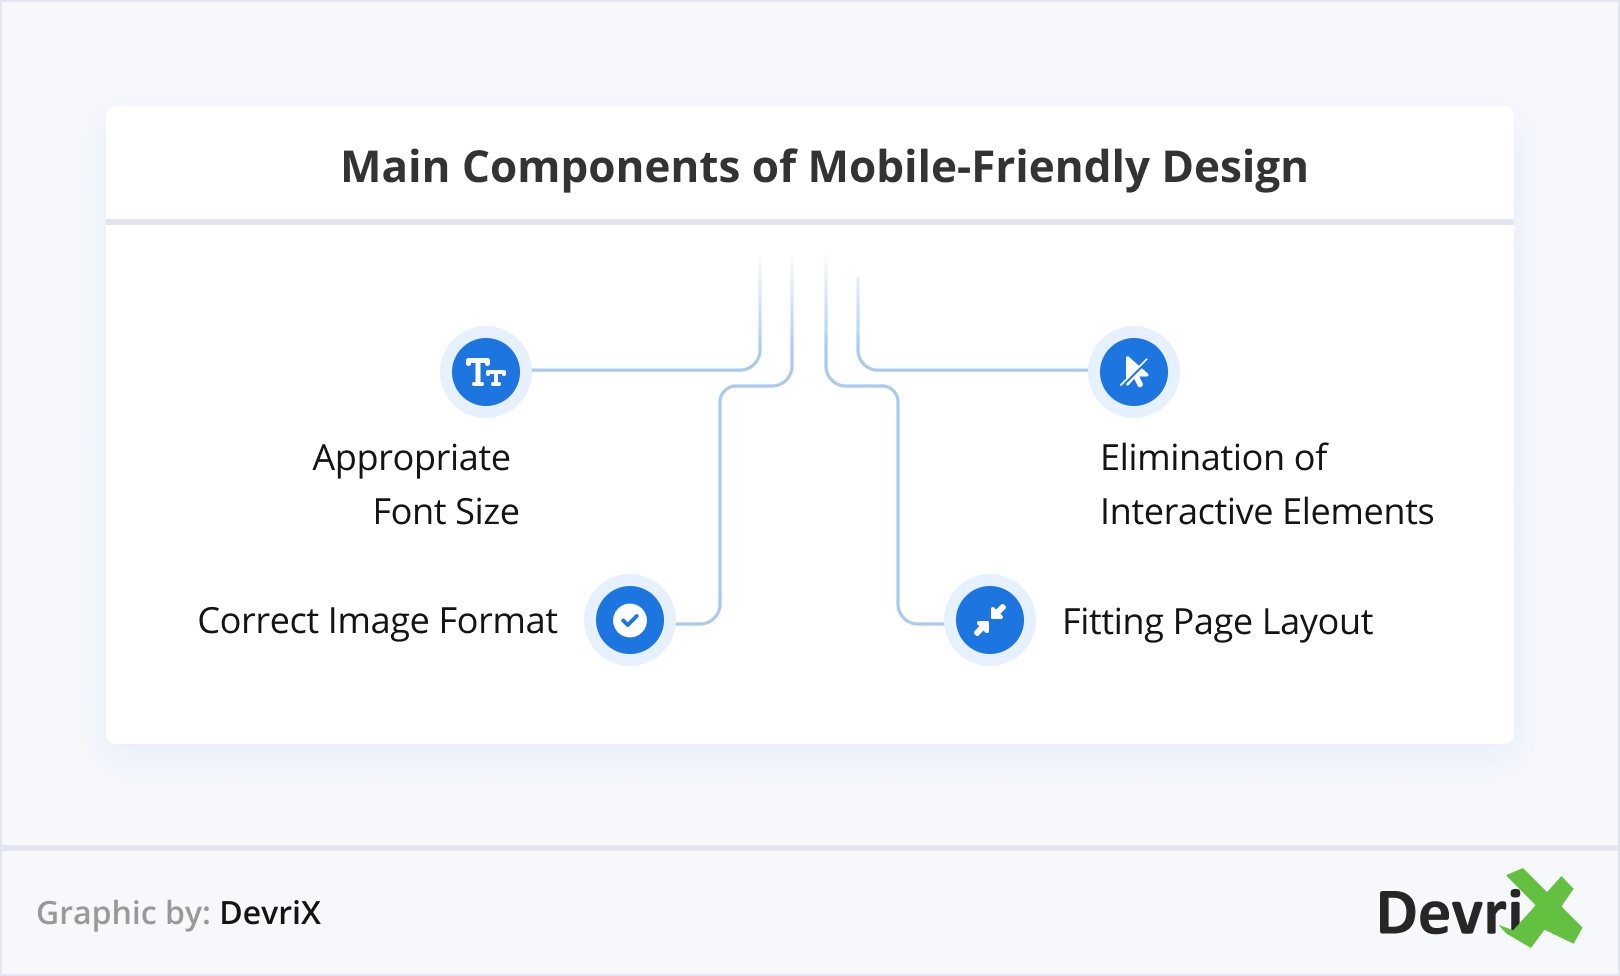 Main Components of Mobile-Friendly Design